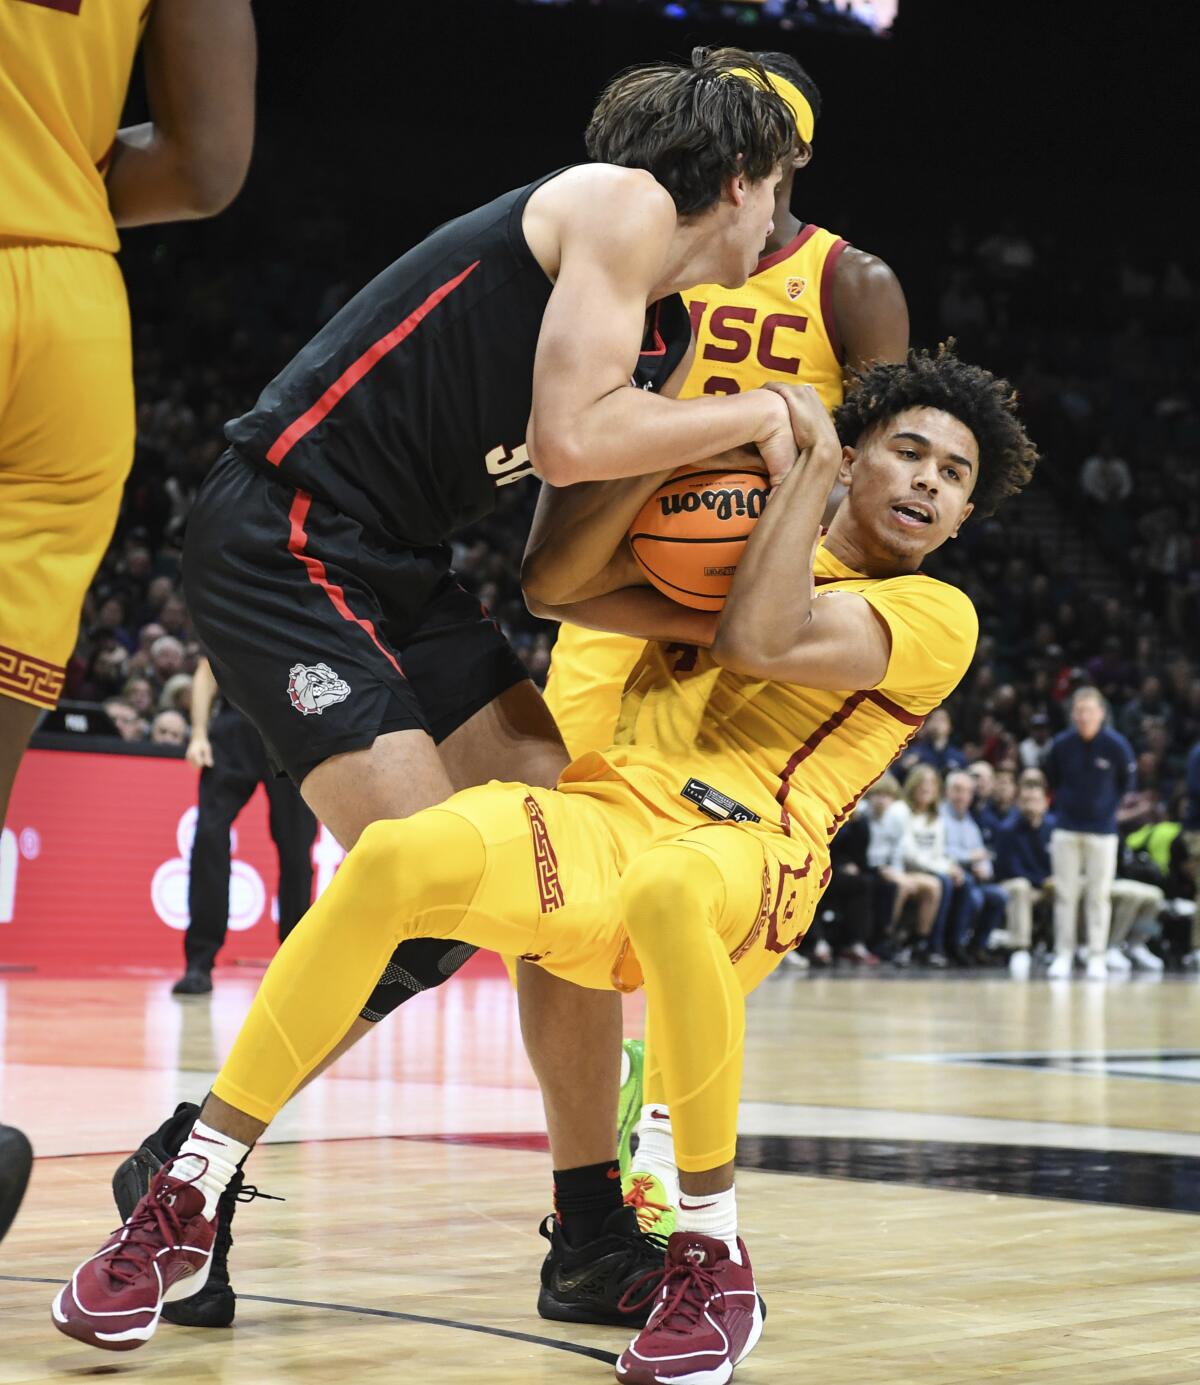 Gonzaga forward Braden Huff and USC guard Oziyah Sellers fight for the ball during a game Saturday